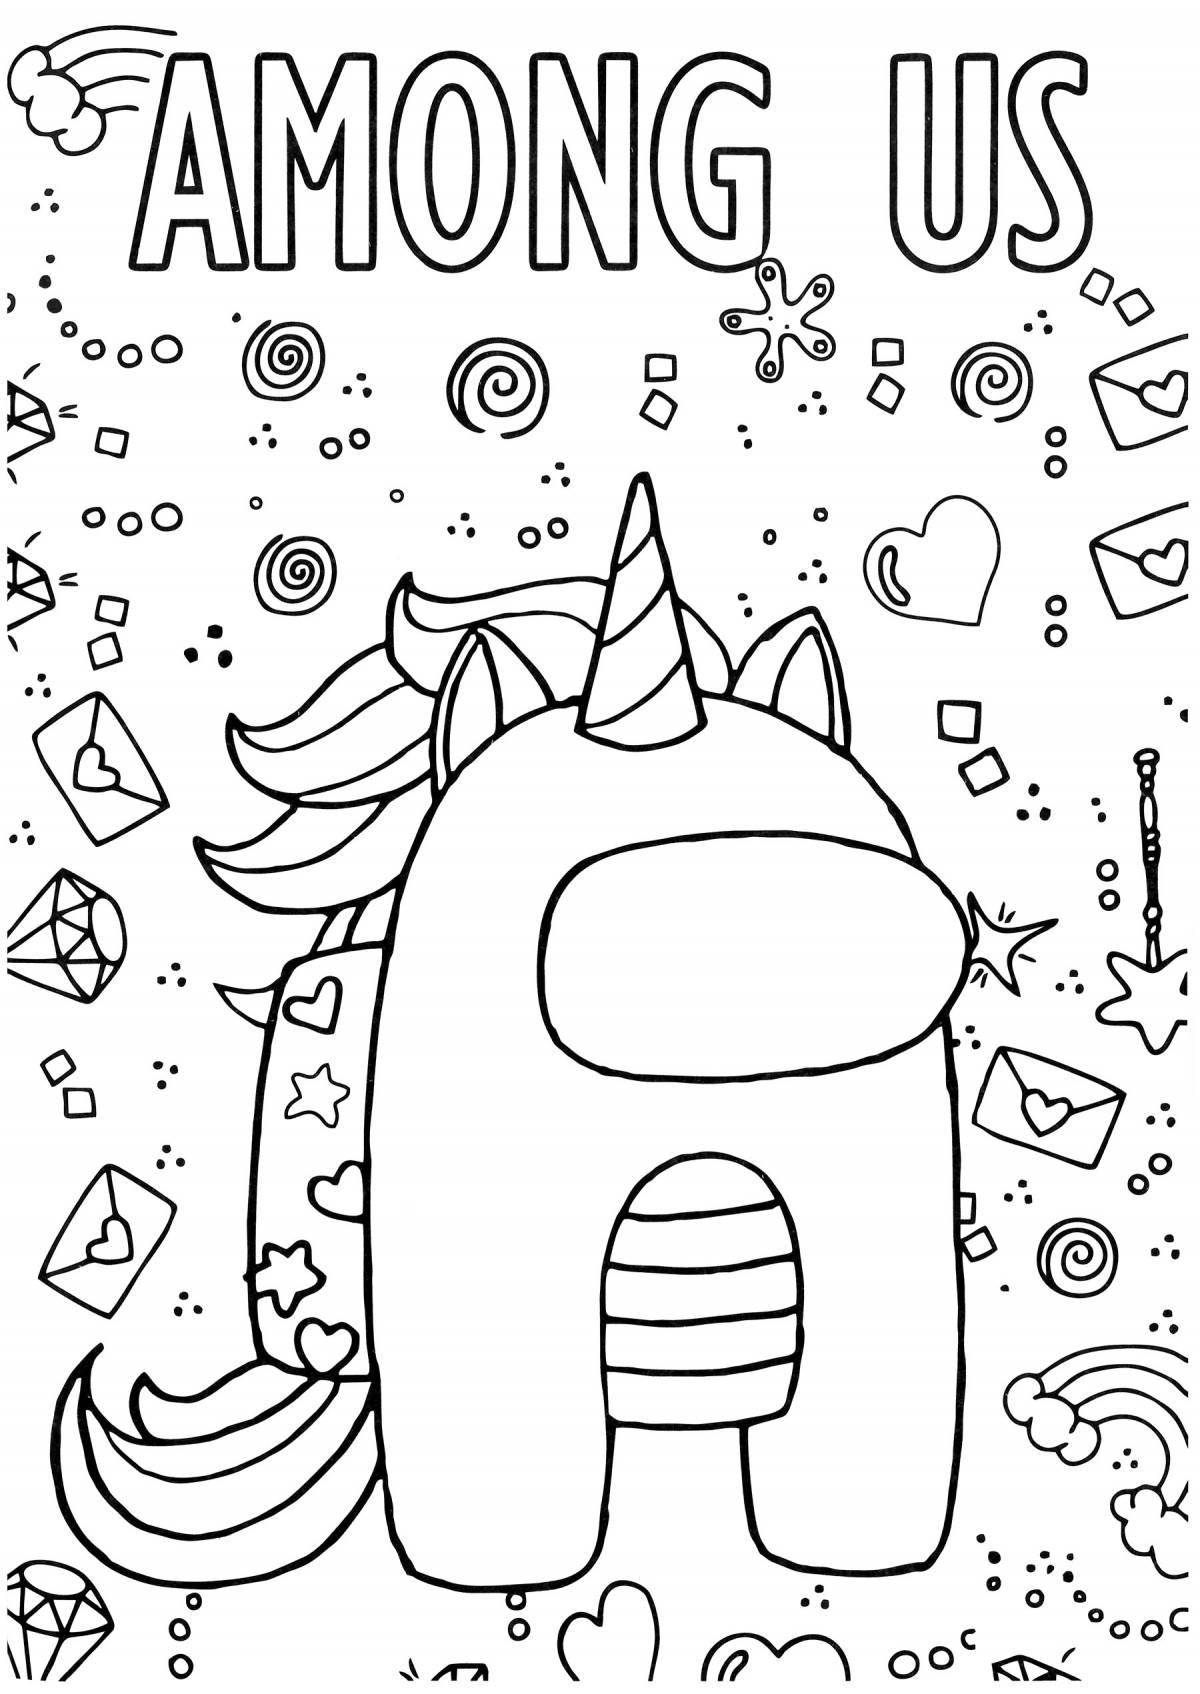 Fluffy ace cat coloring page